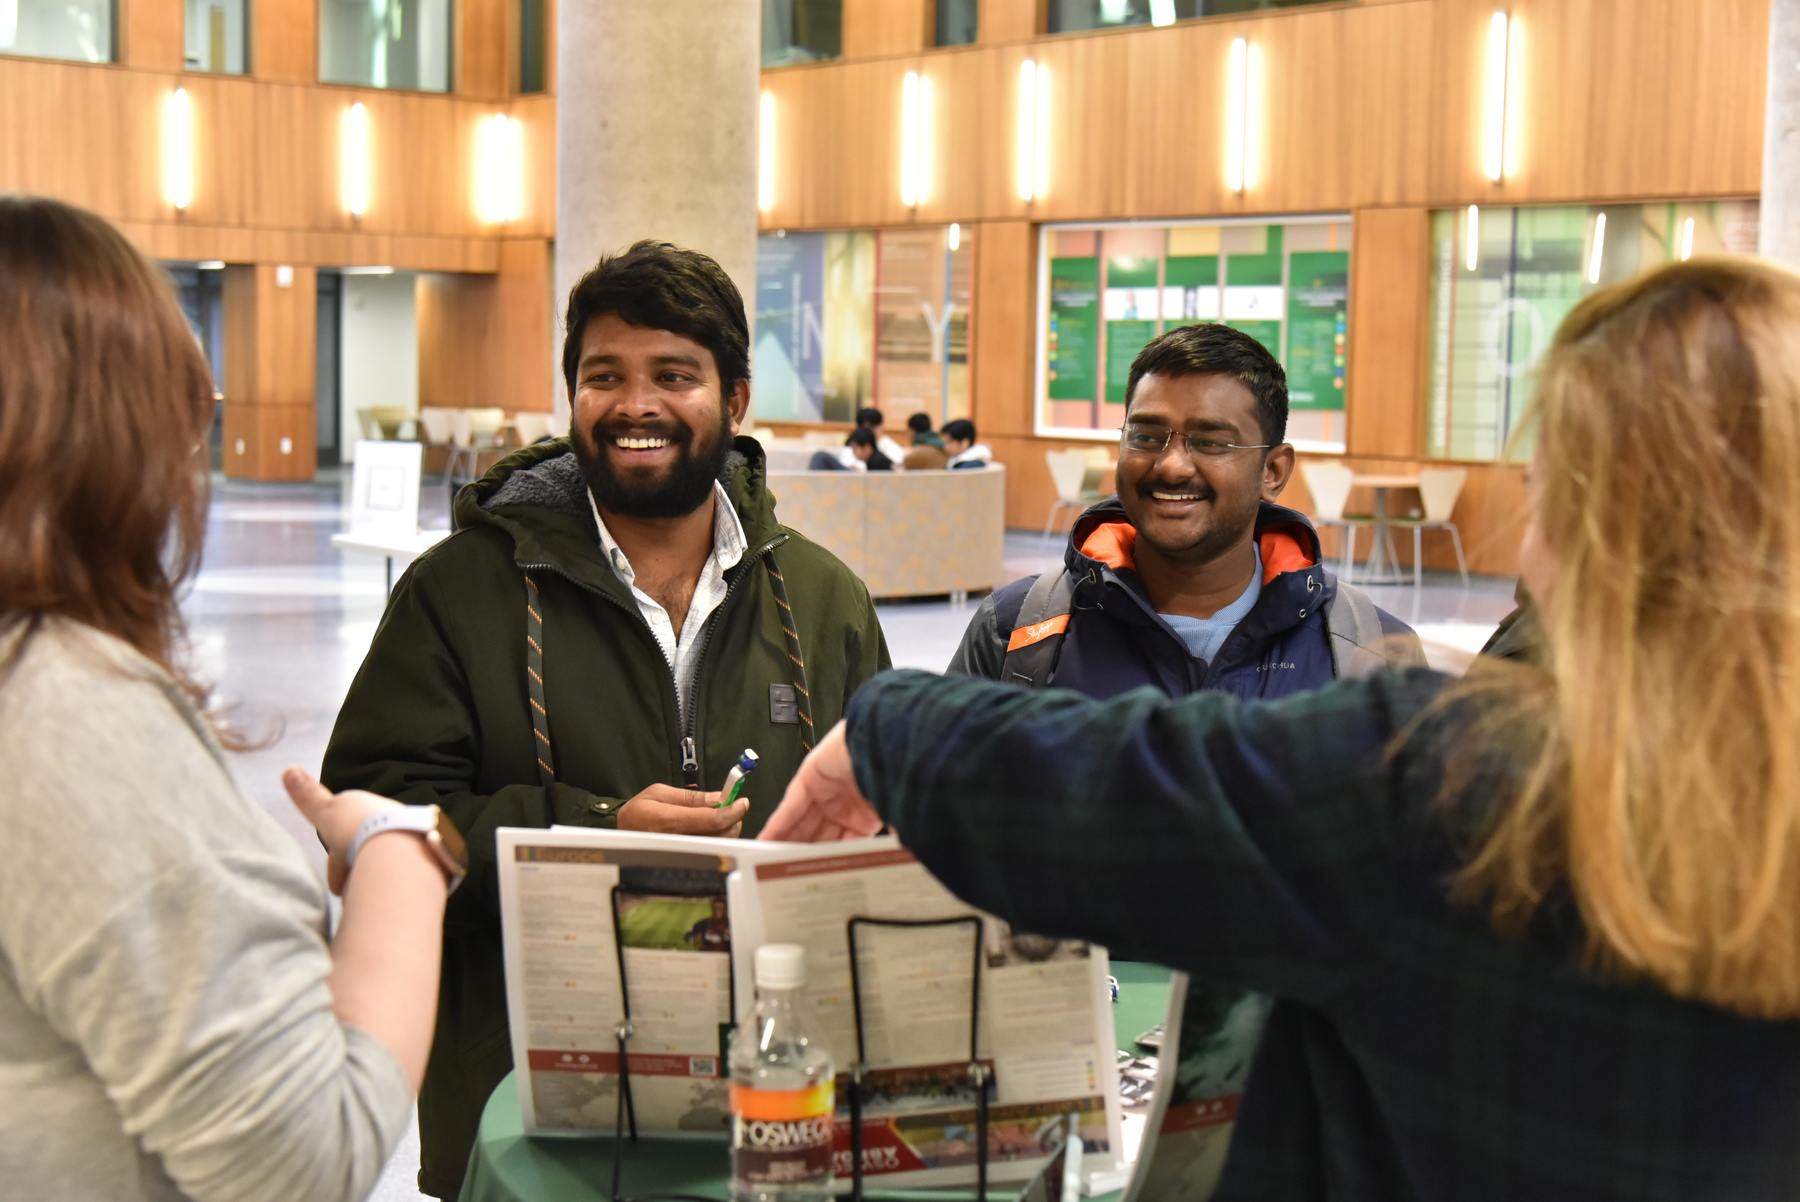 Orientation for the new incoming international students was held Jan. 18 in the Shineman Center, hosted by International Student and Scholar Services.